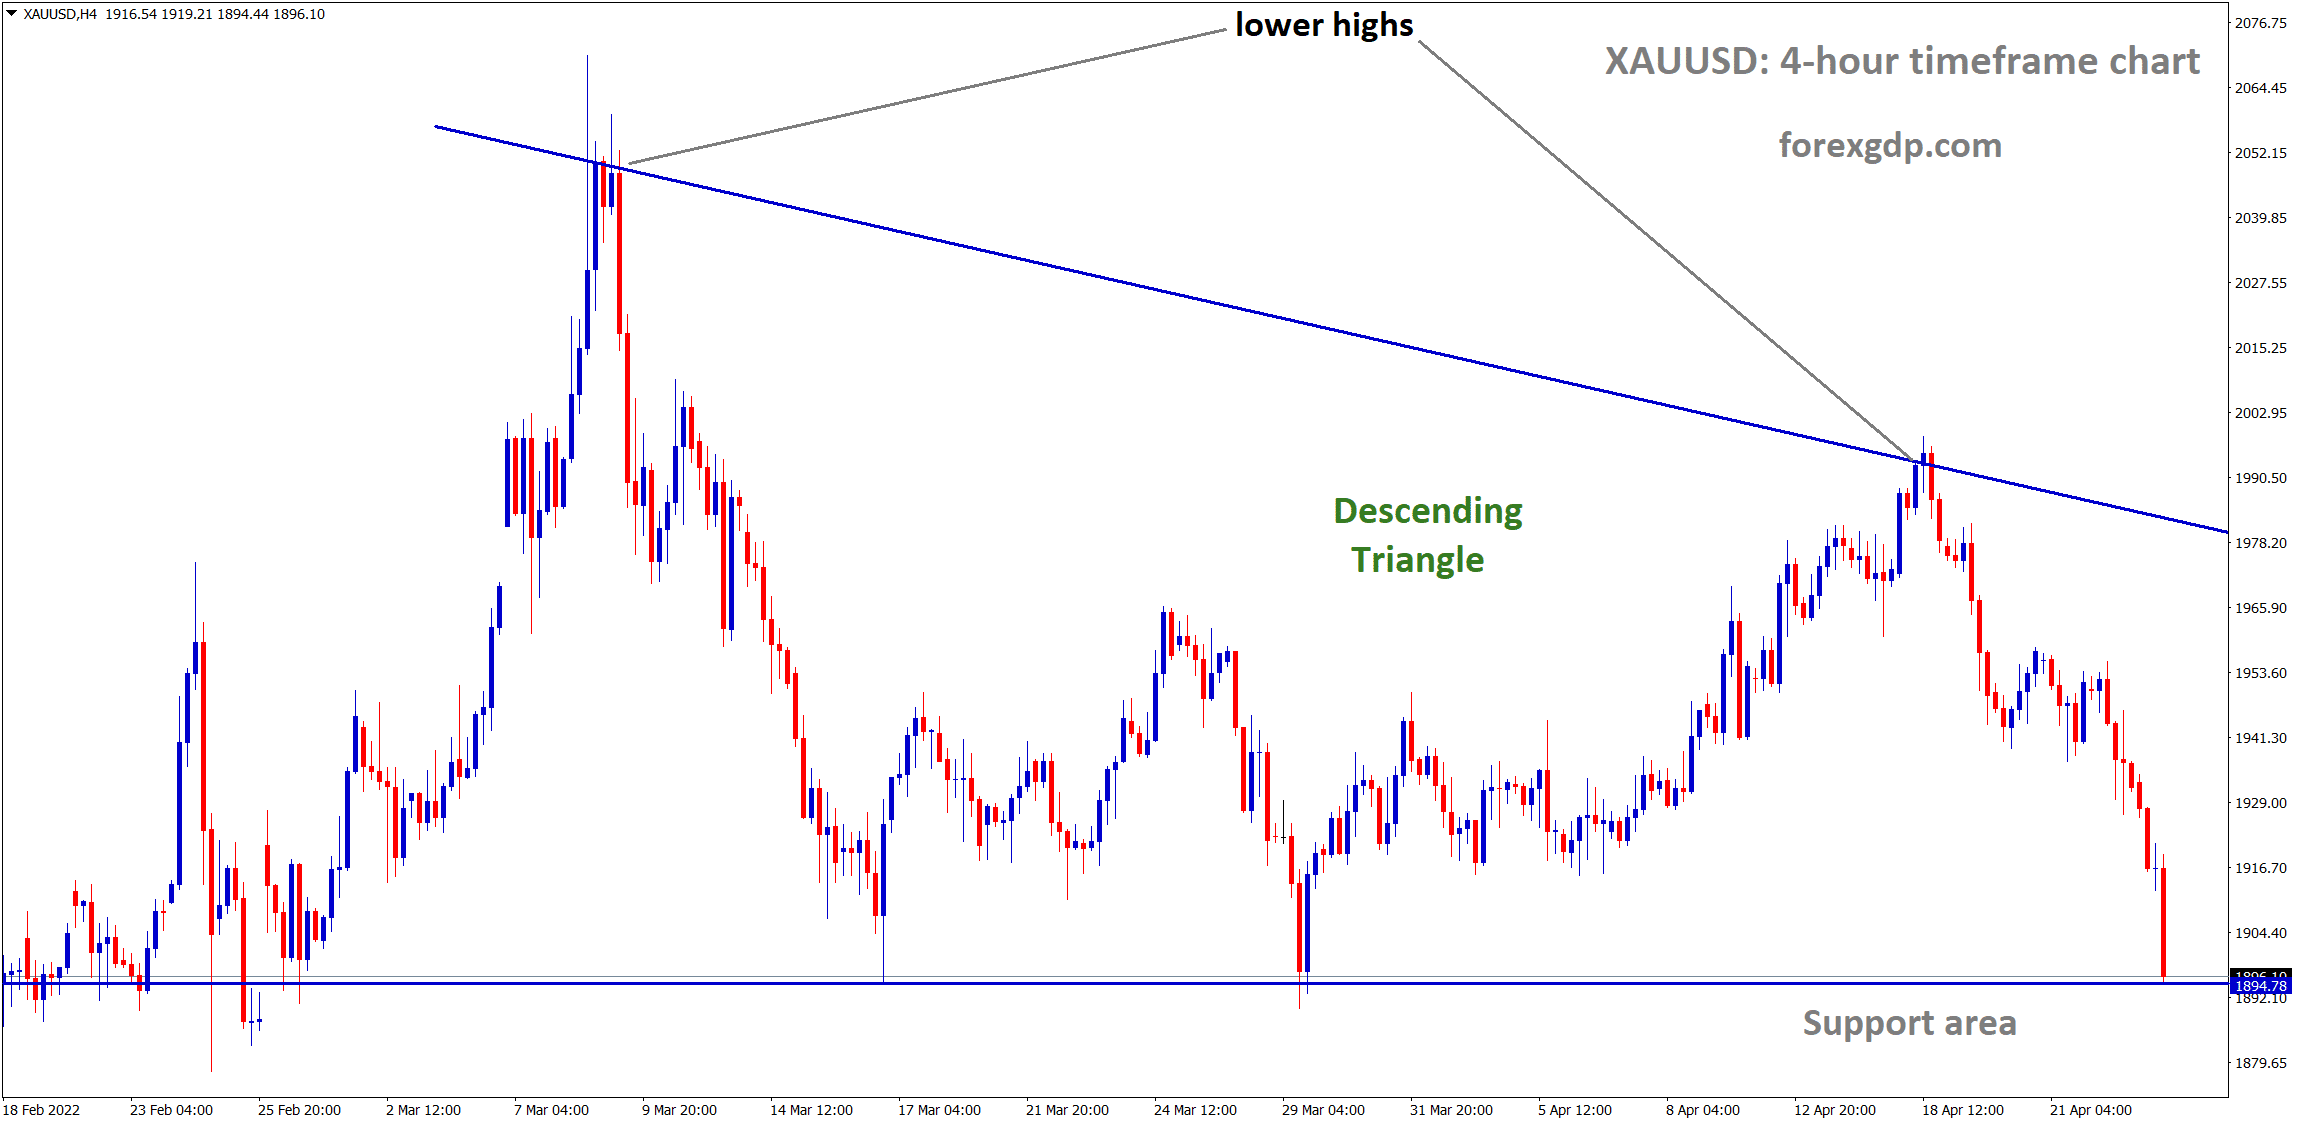 XAUUSD moving in Descending Triangle pattern and reached the support area.